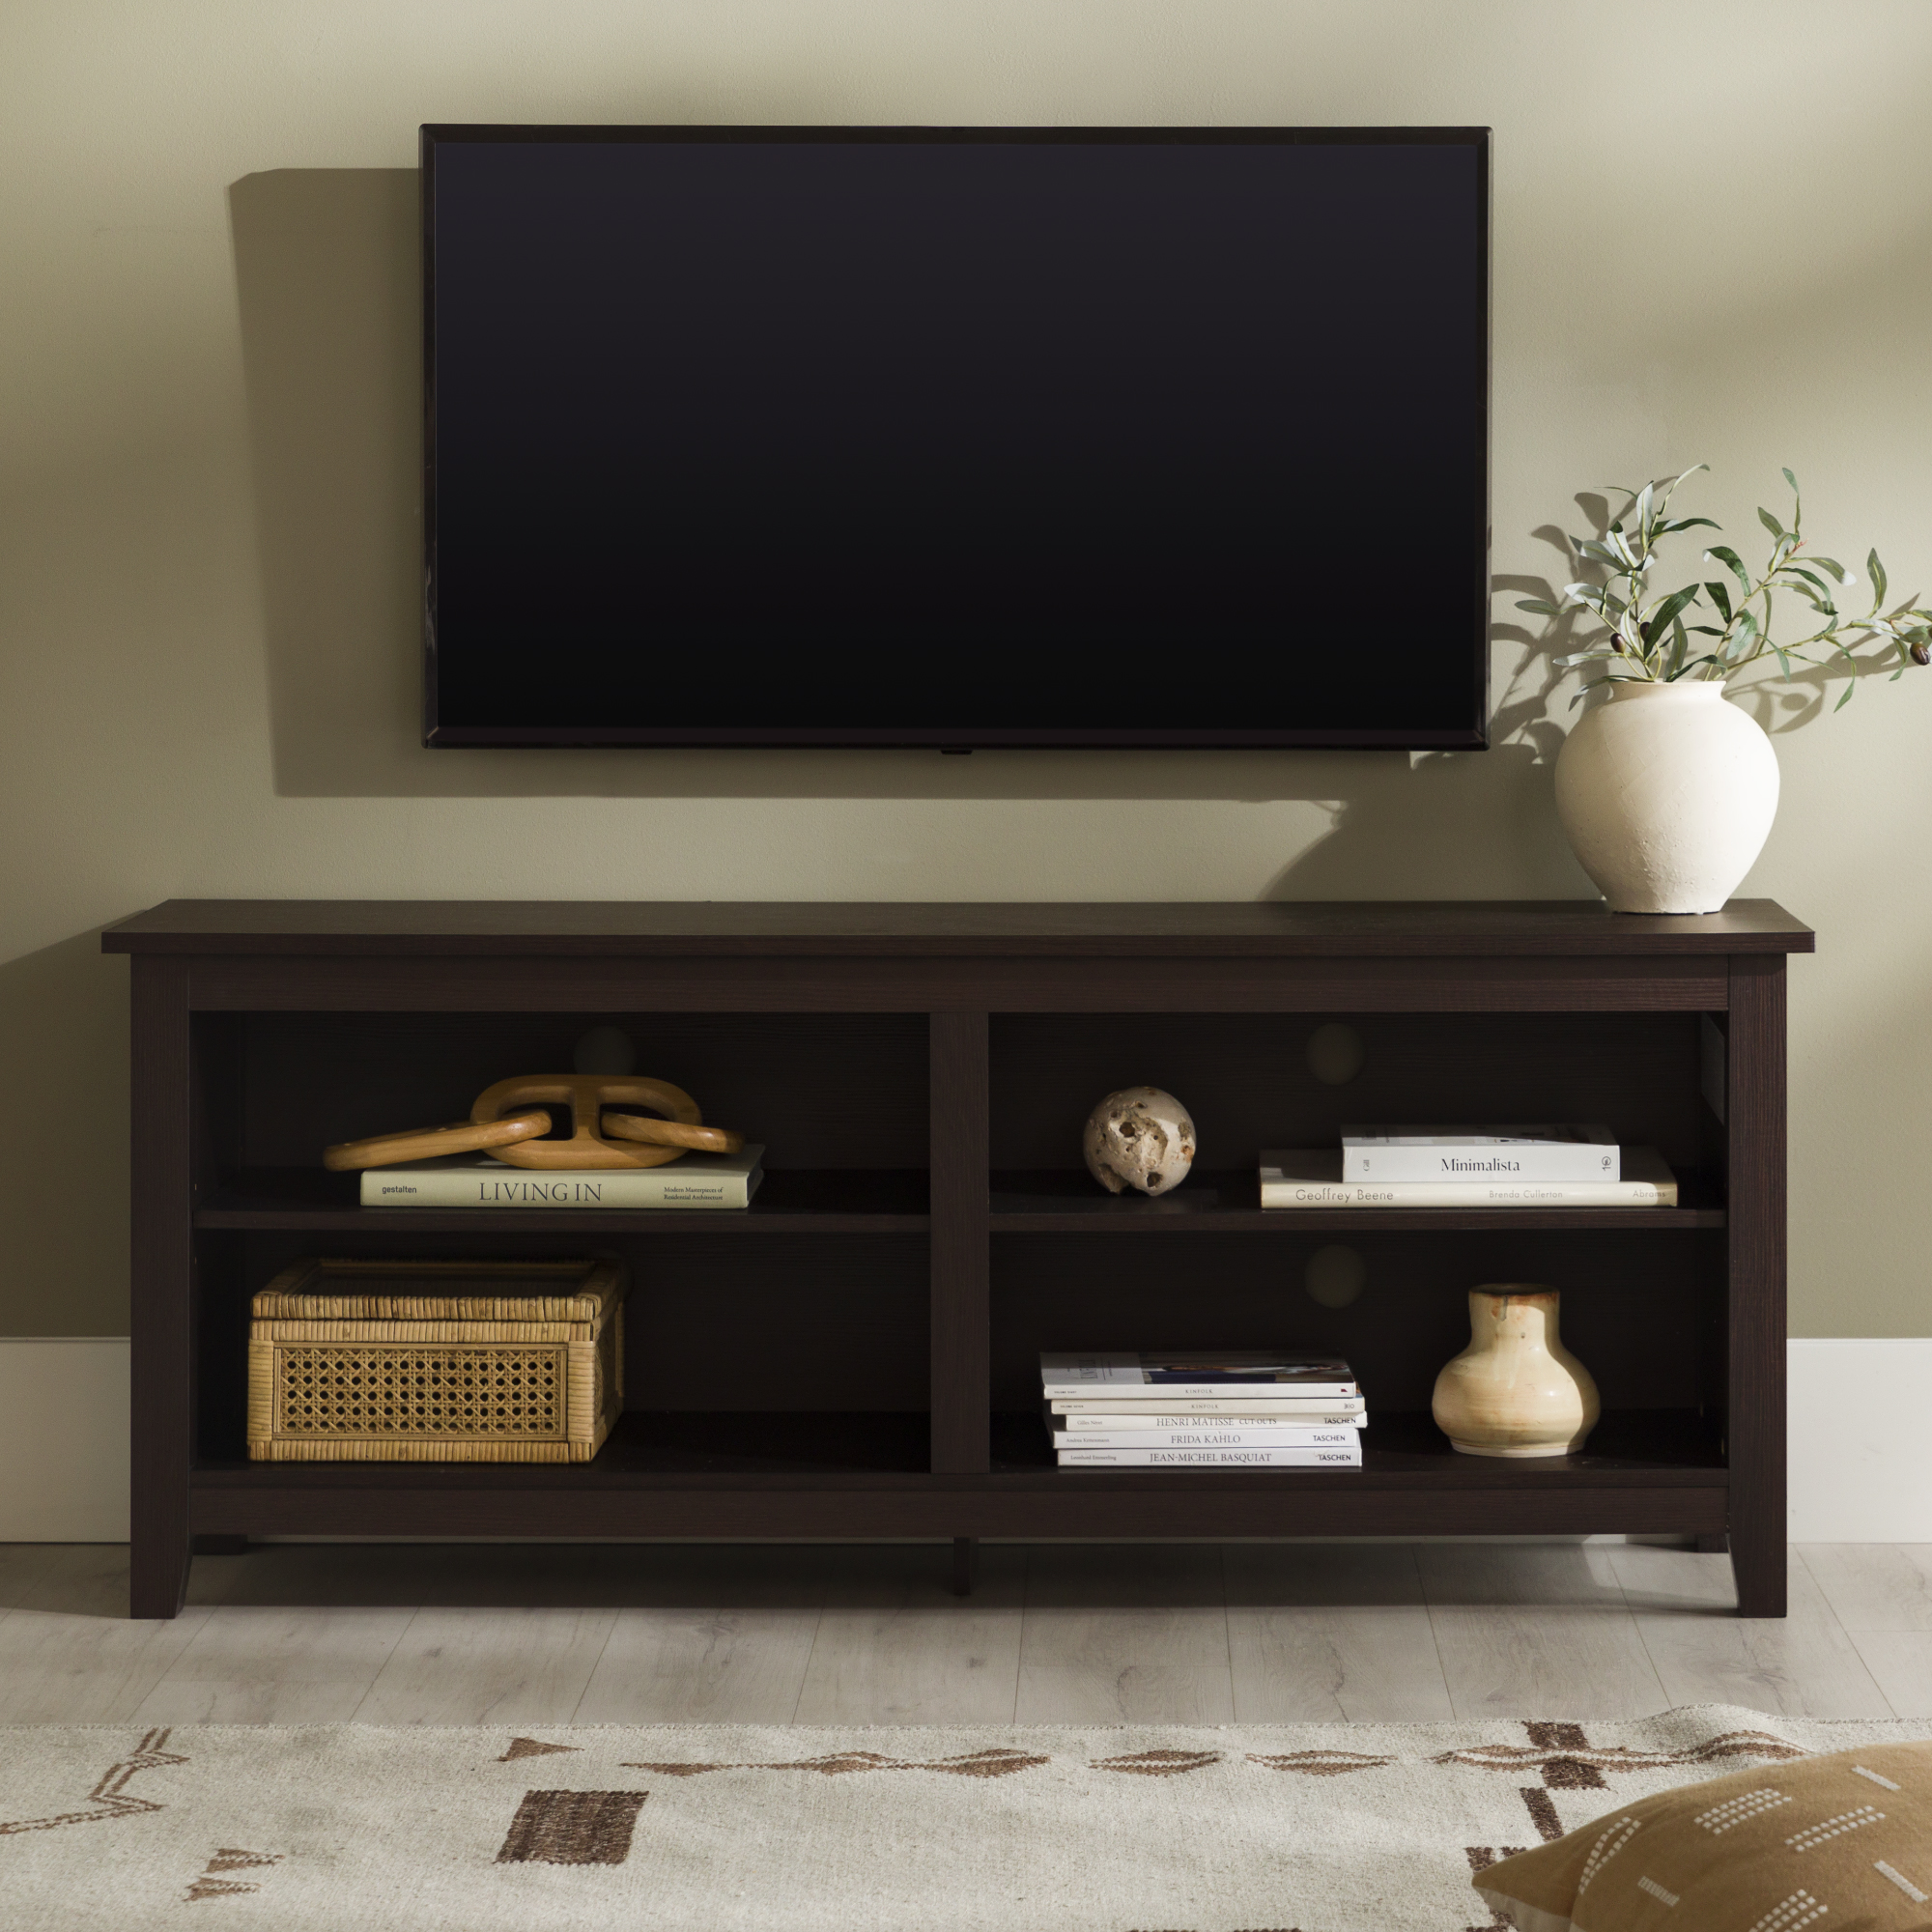 Walker Edison Contemporary Wood TV Media Storage Stand for TVs up to 60" - Espresso - image 3 of 7